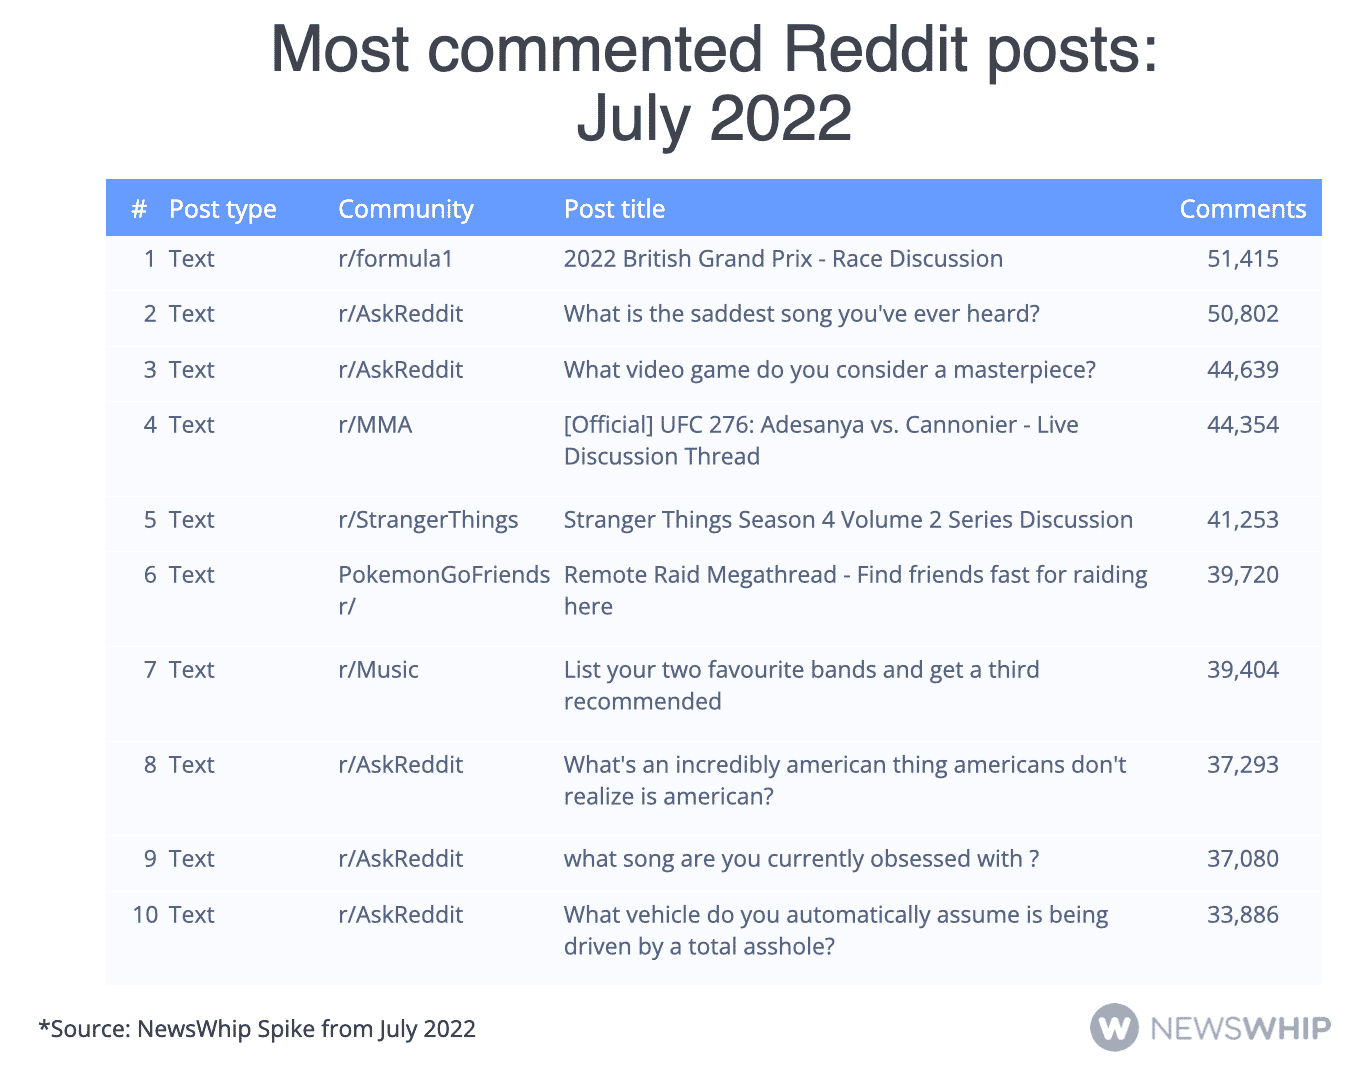 Table showing the most commented Reddit posts in July 2022, ranked by comments